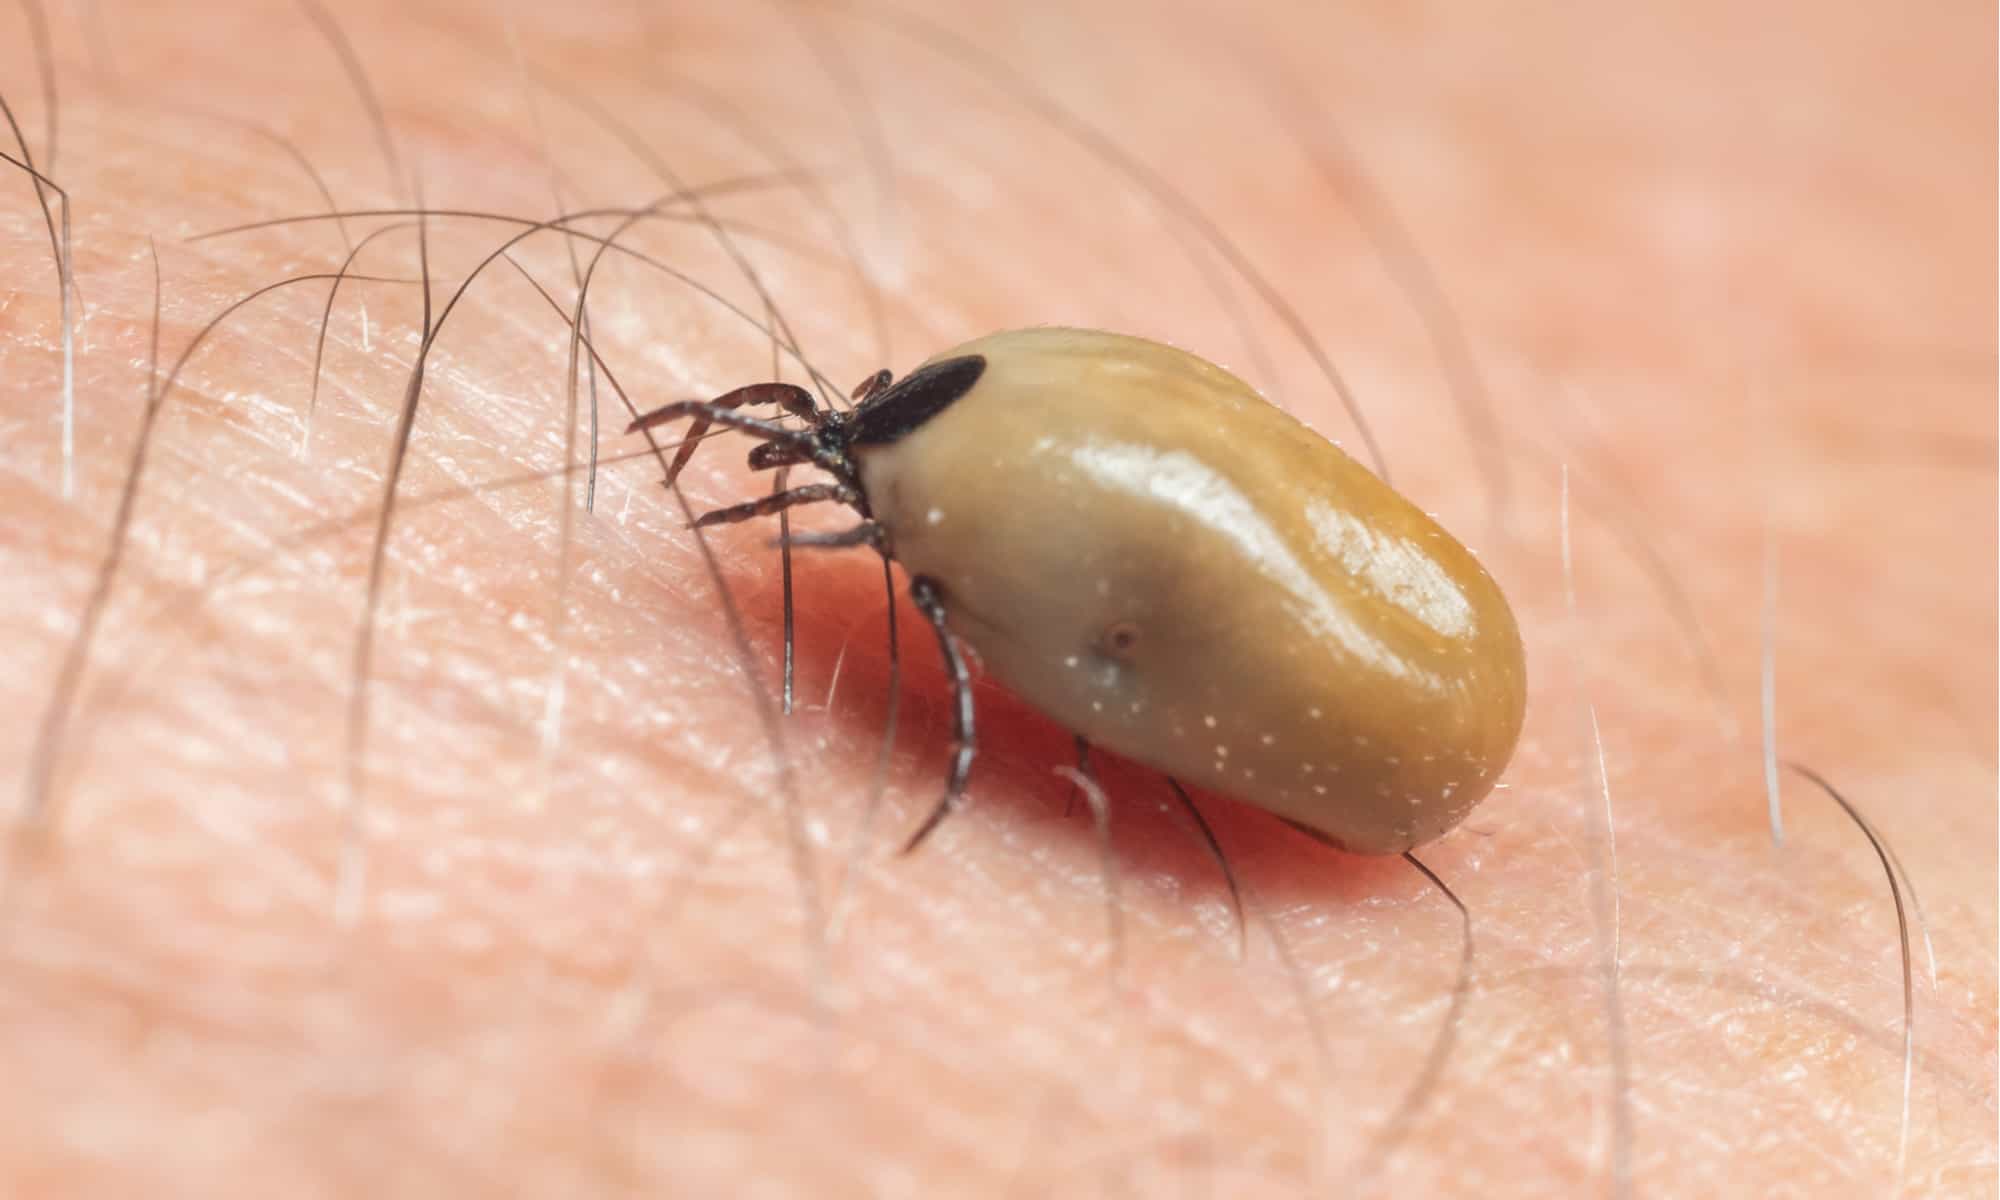 What Is The Difference Between Deer Ticks And Dog Ticks?